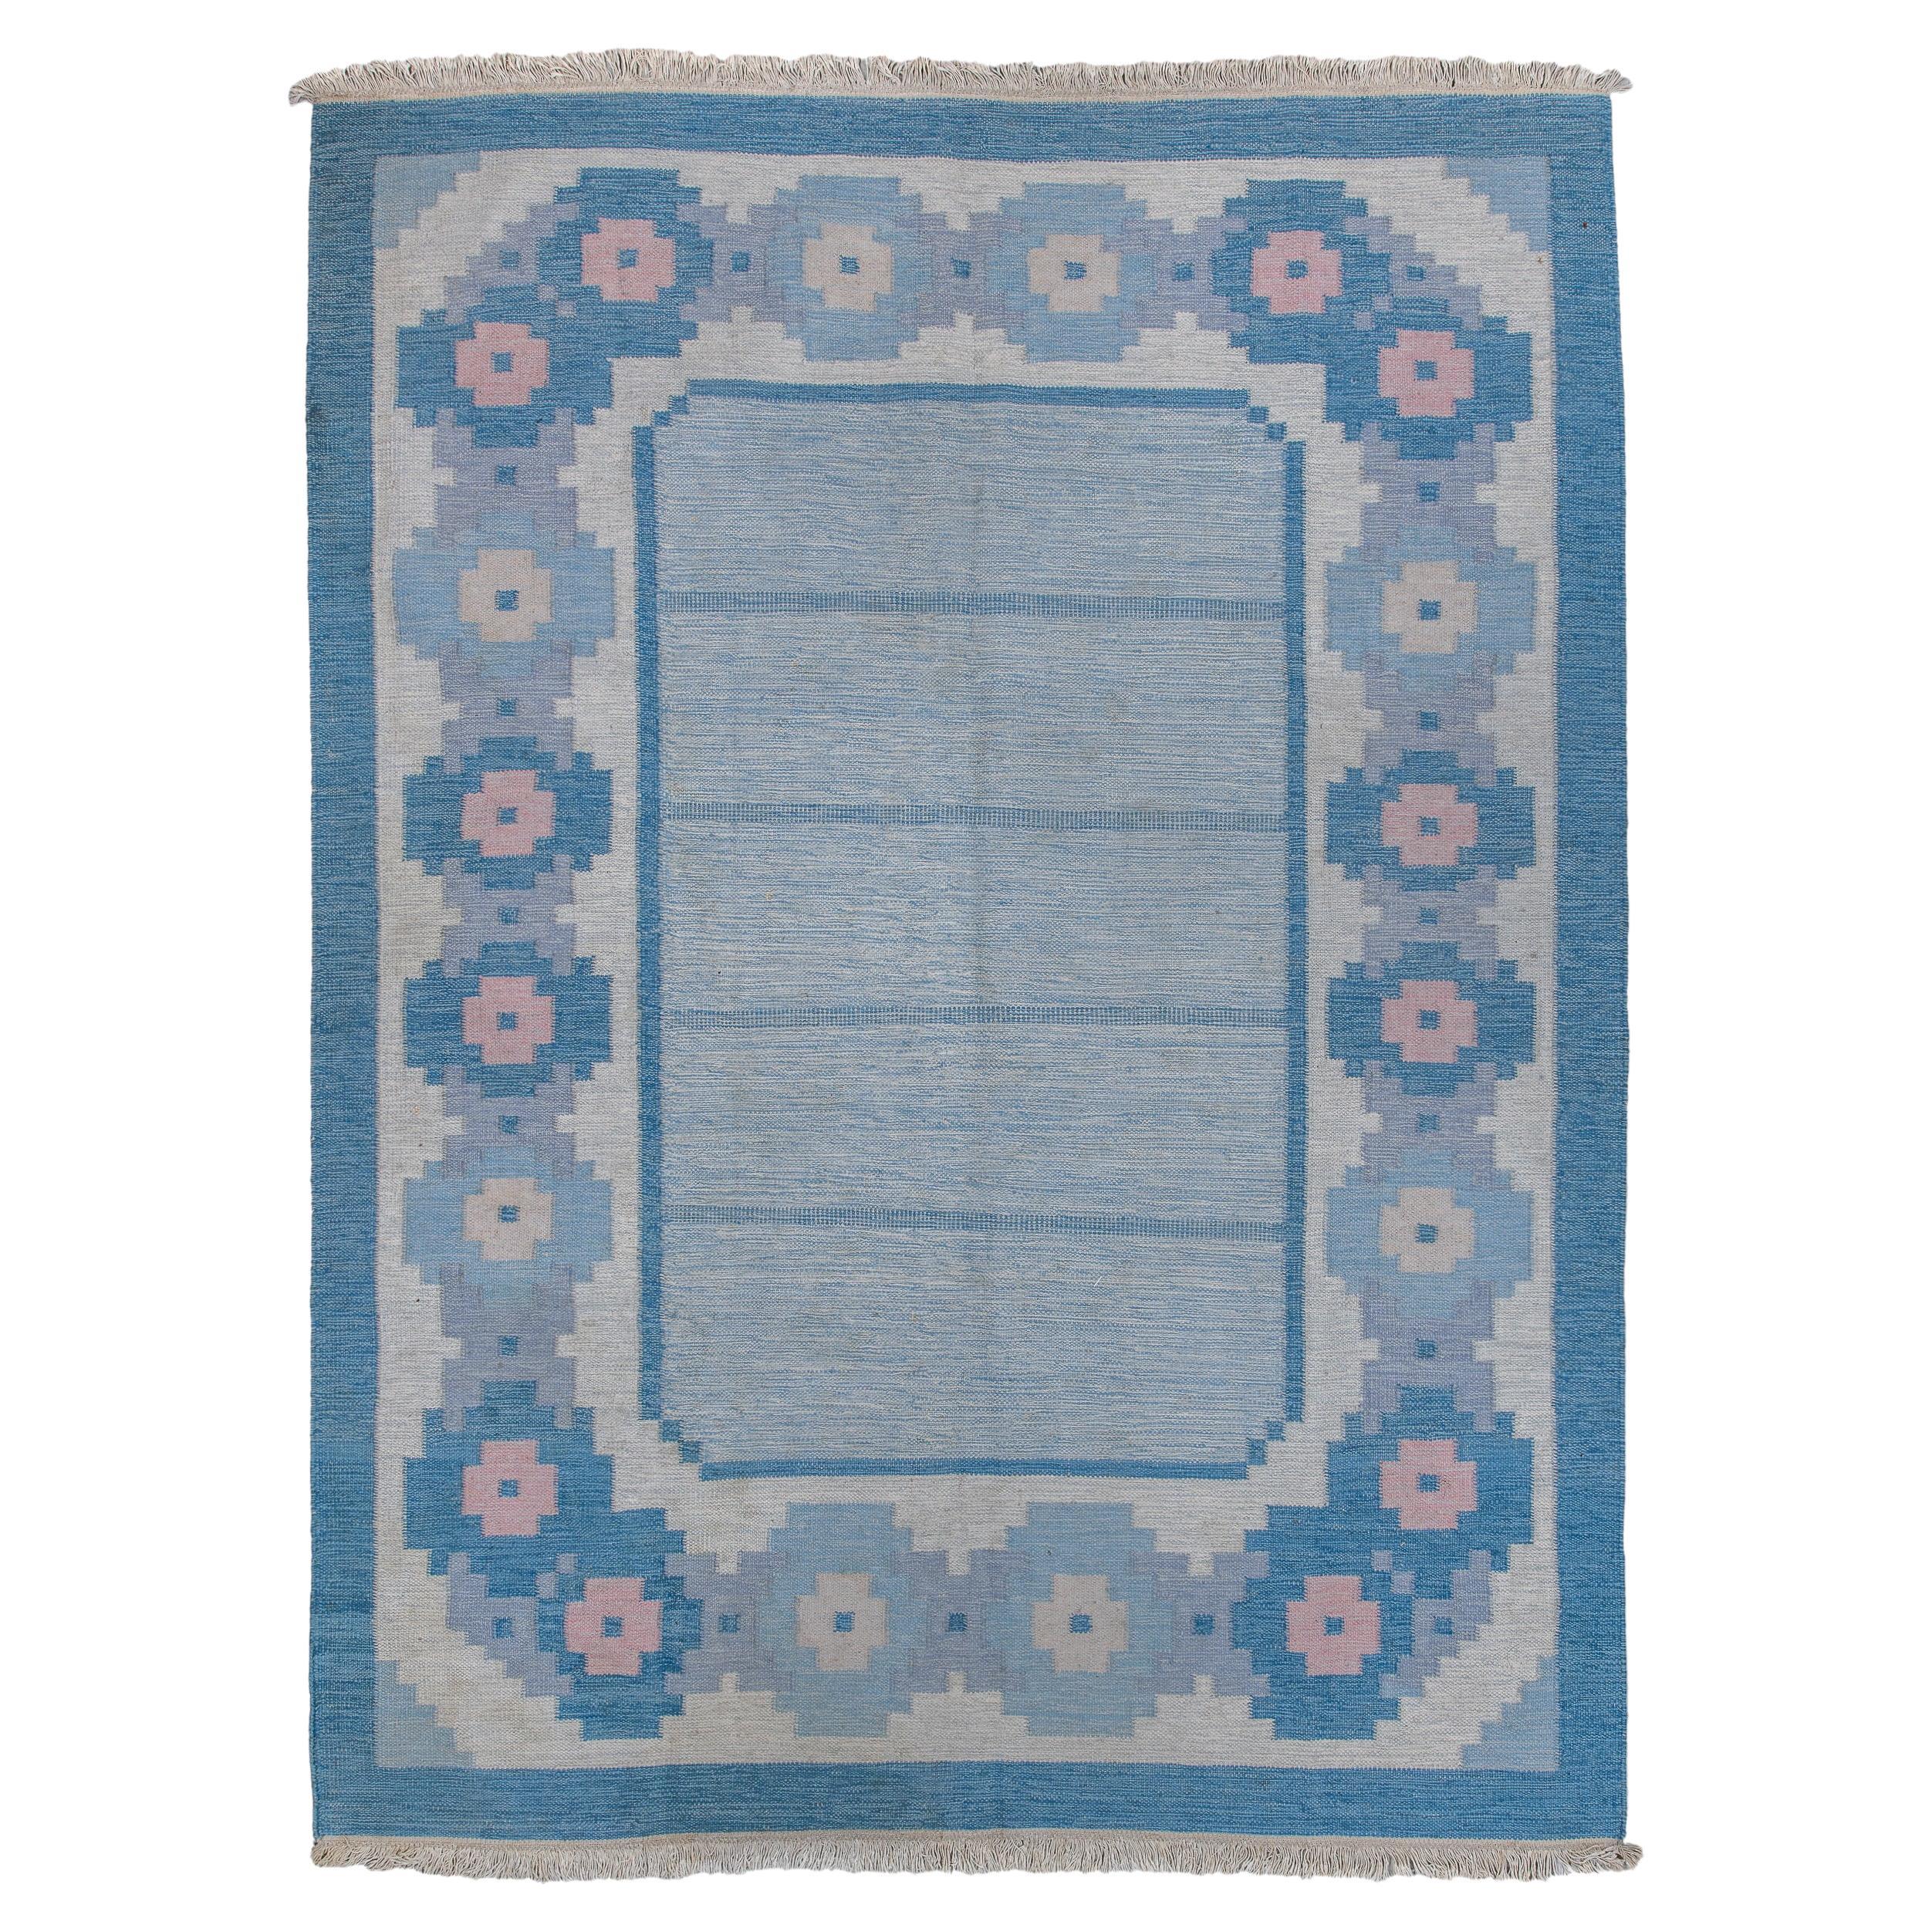 Eliko Rugs by David Ariel Vintage Swedish Rollakan Rug, Blue and Pink Tones For Sale